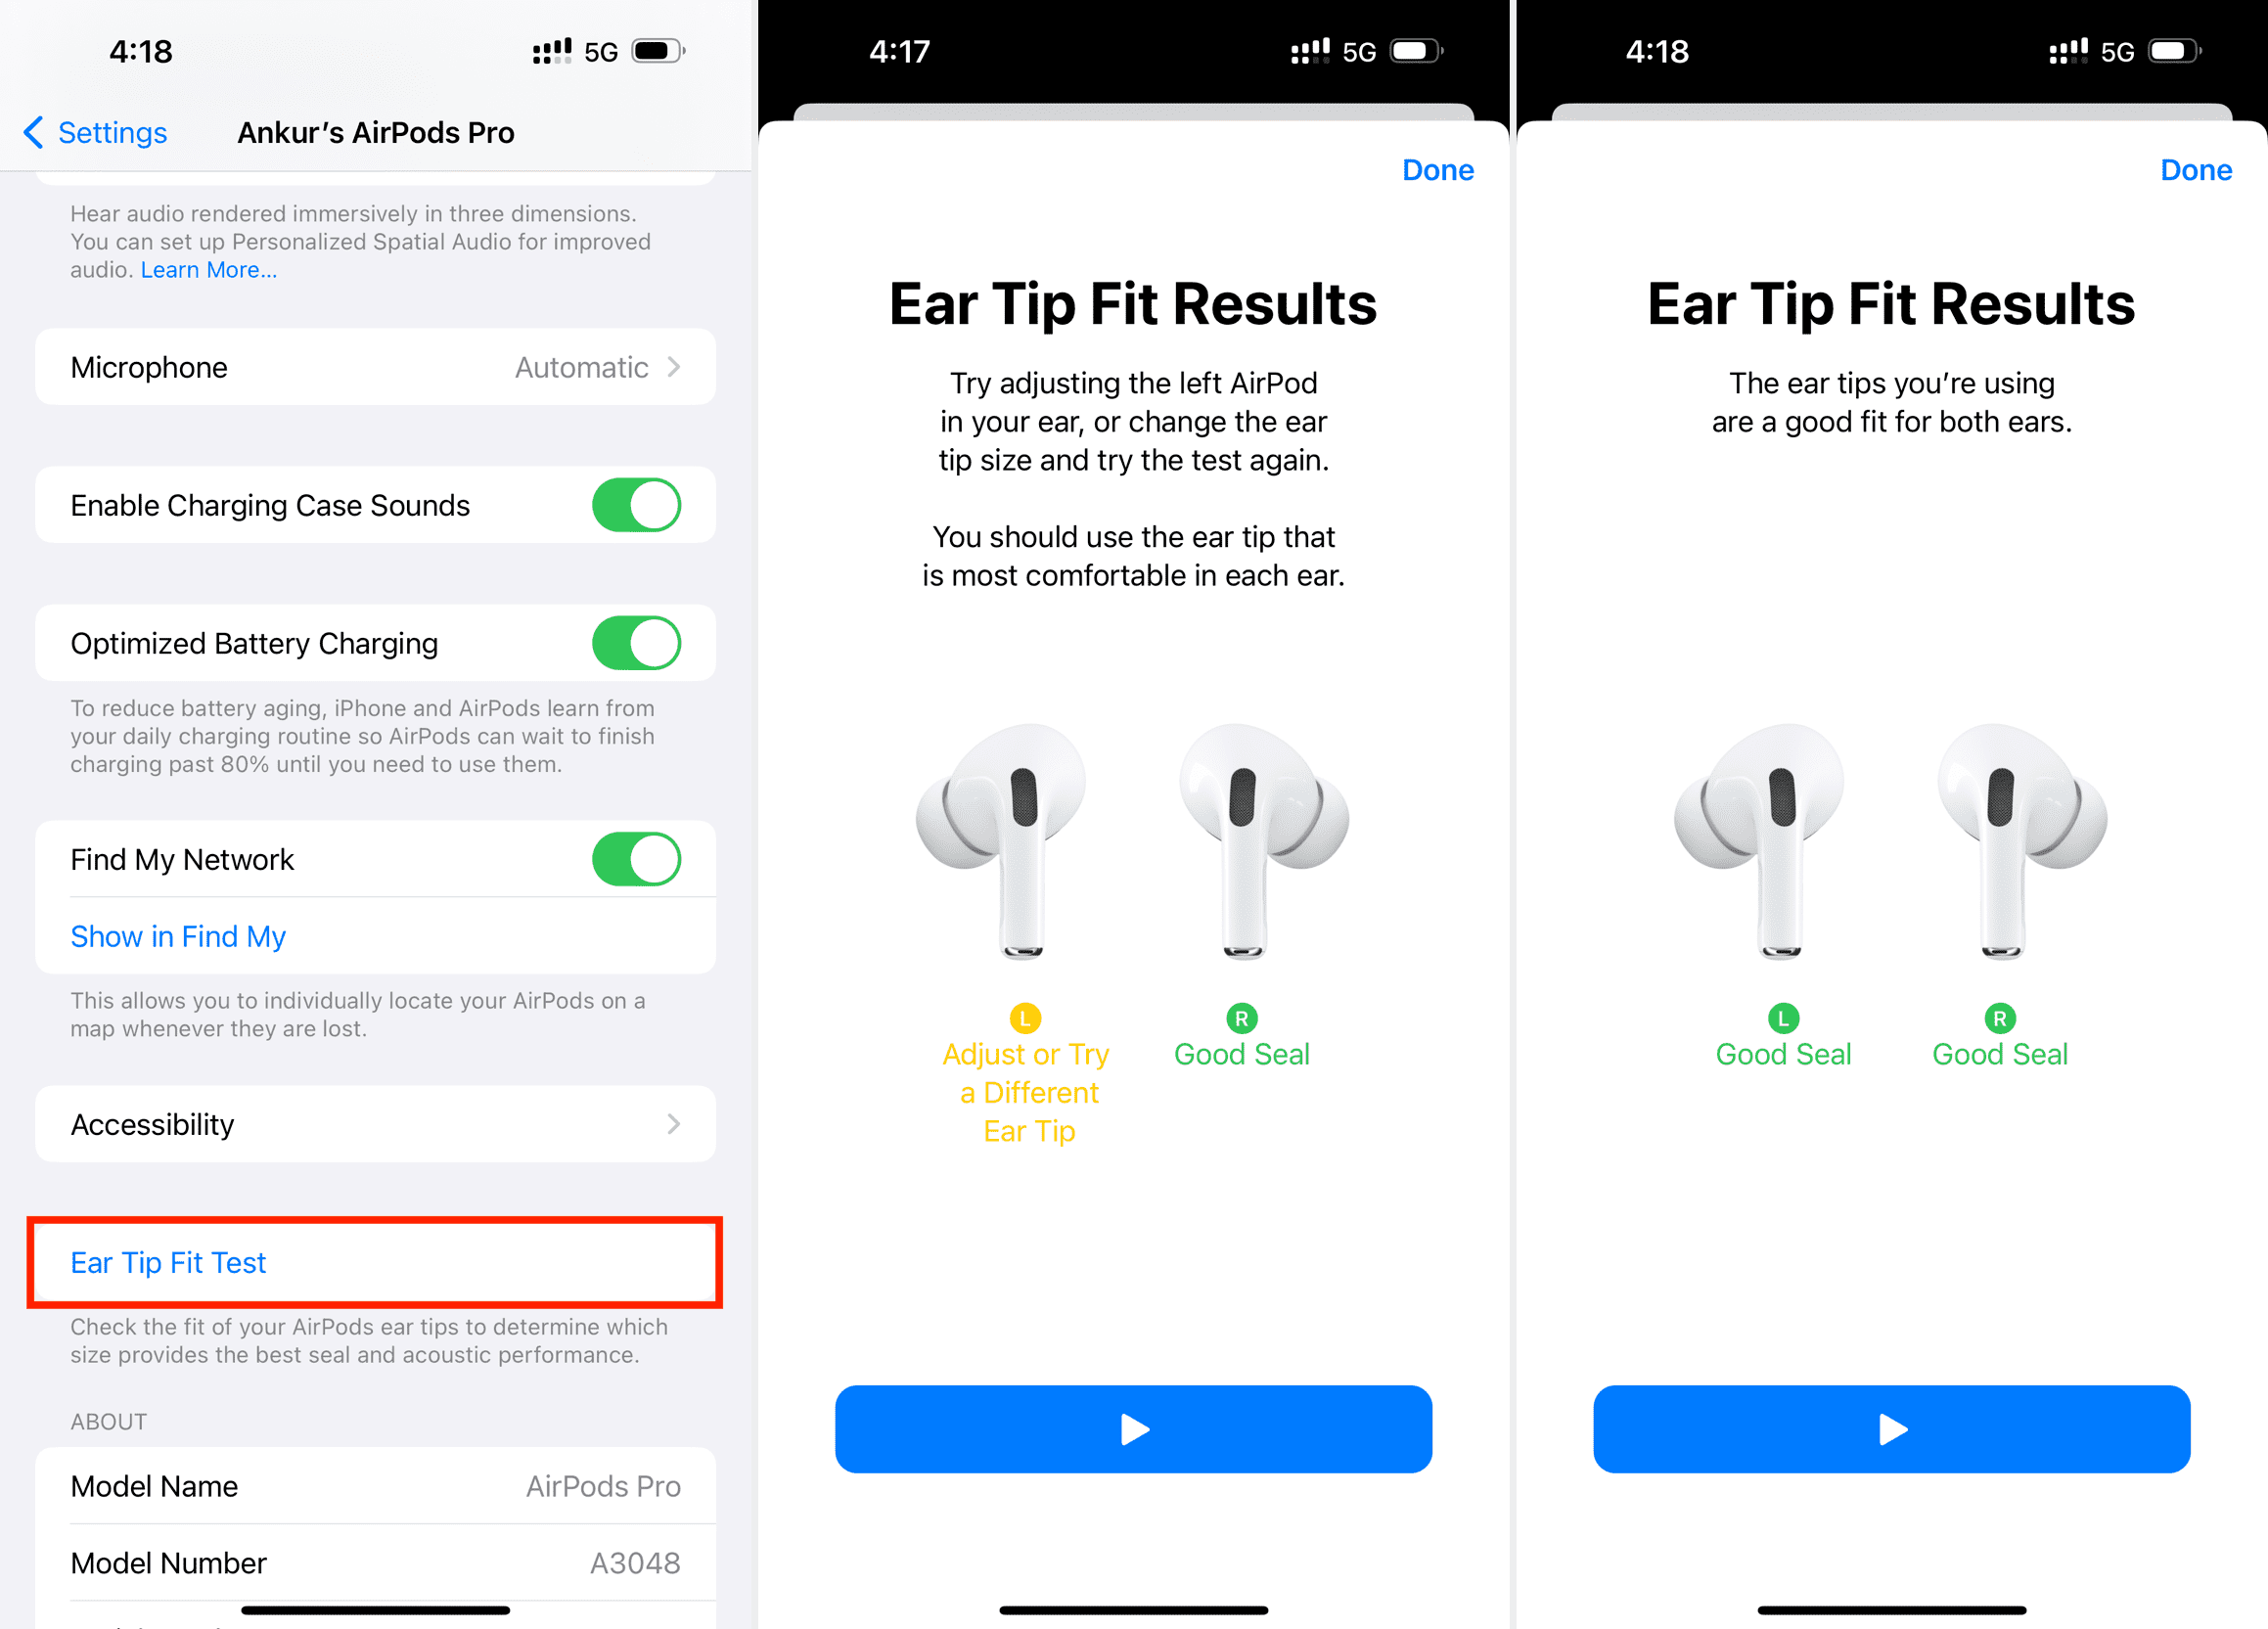 Ear Tip Fit Results for AirPods Pro